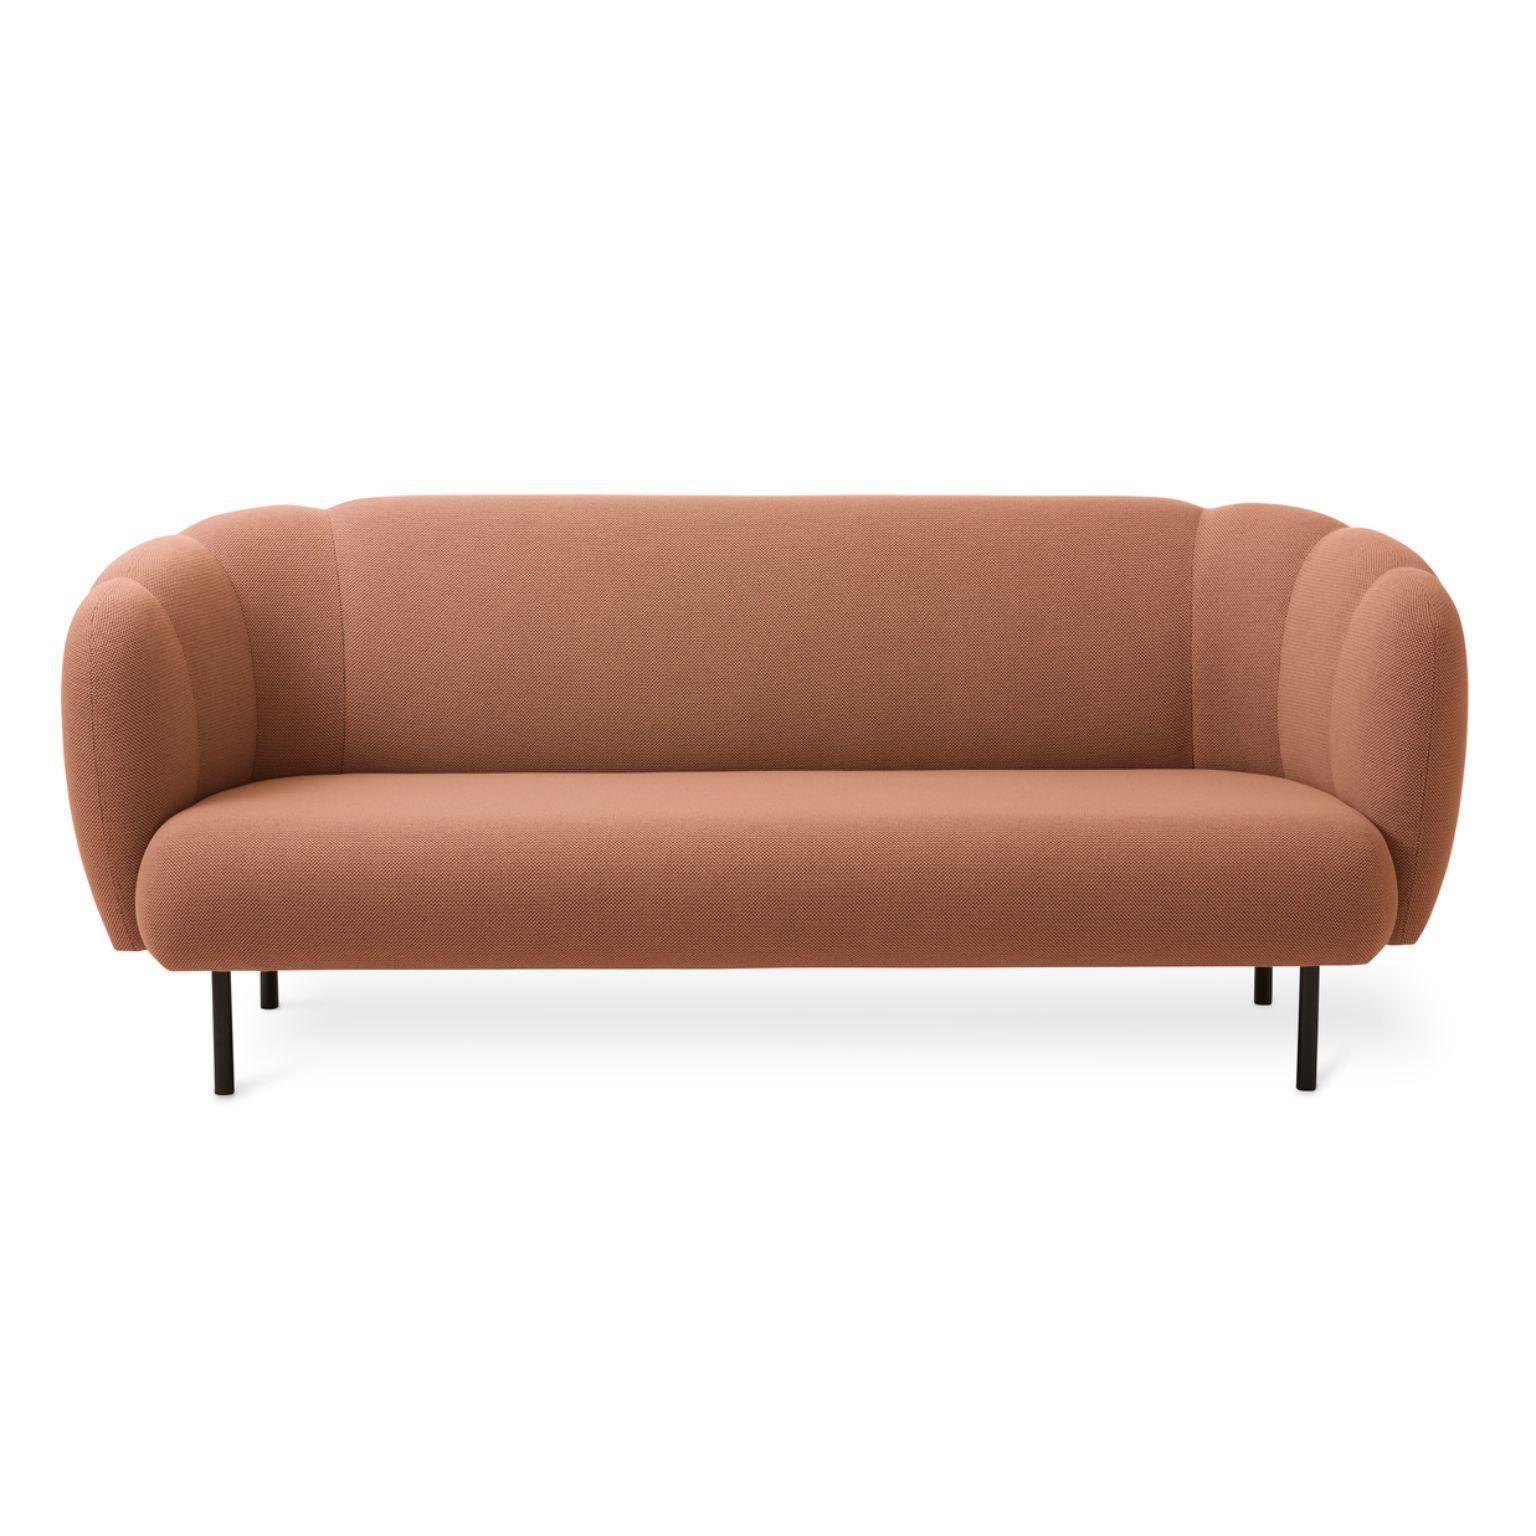 Caper 3 seater with stitches fresh peach by Warm Nordic
Dimensions: D200 x W84 x H 80 cm
Material: Textile upholstery, Wooden frame, Powder coated black steel legs.
Weight: 55.5 kg
Also available in different colours and finishes. 

An elegant